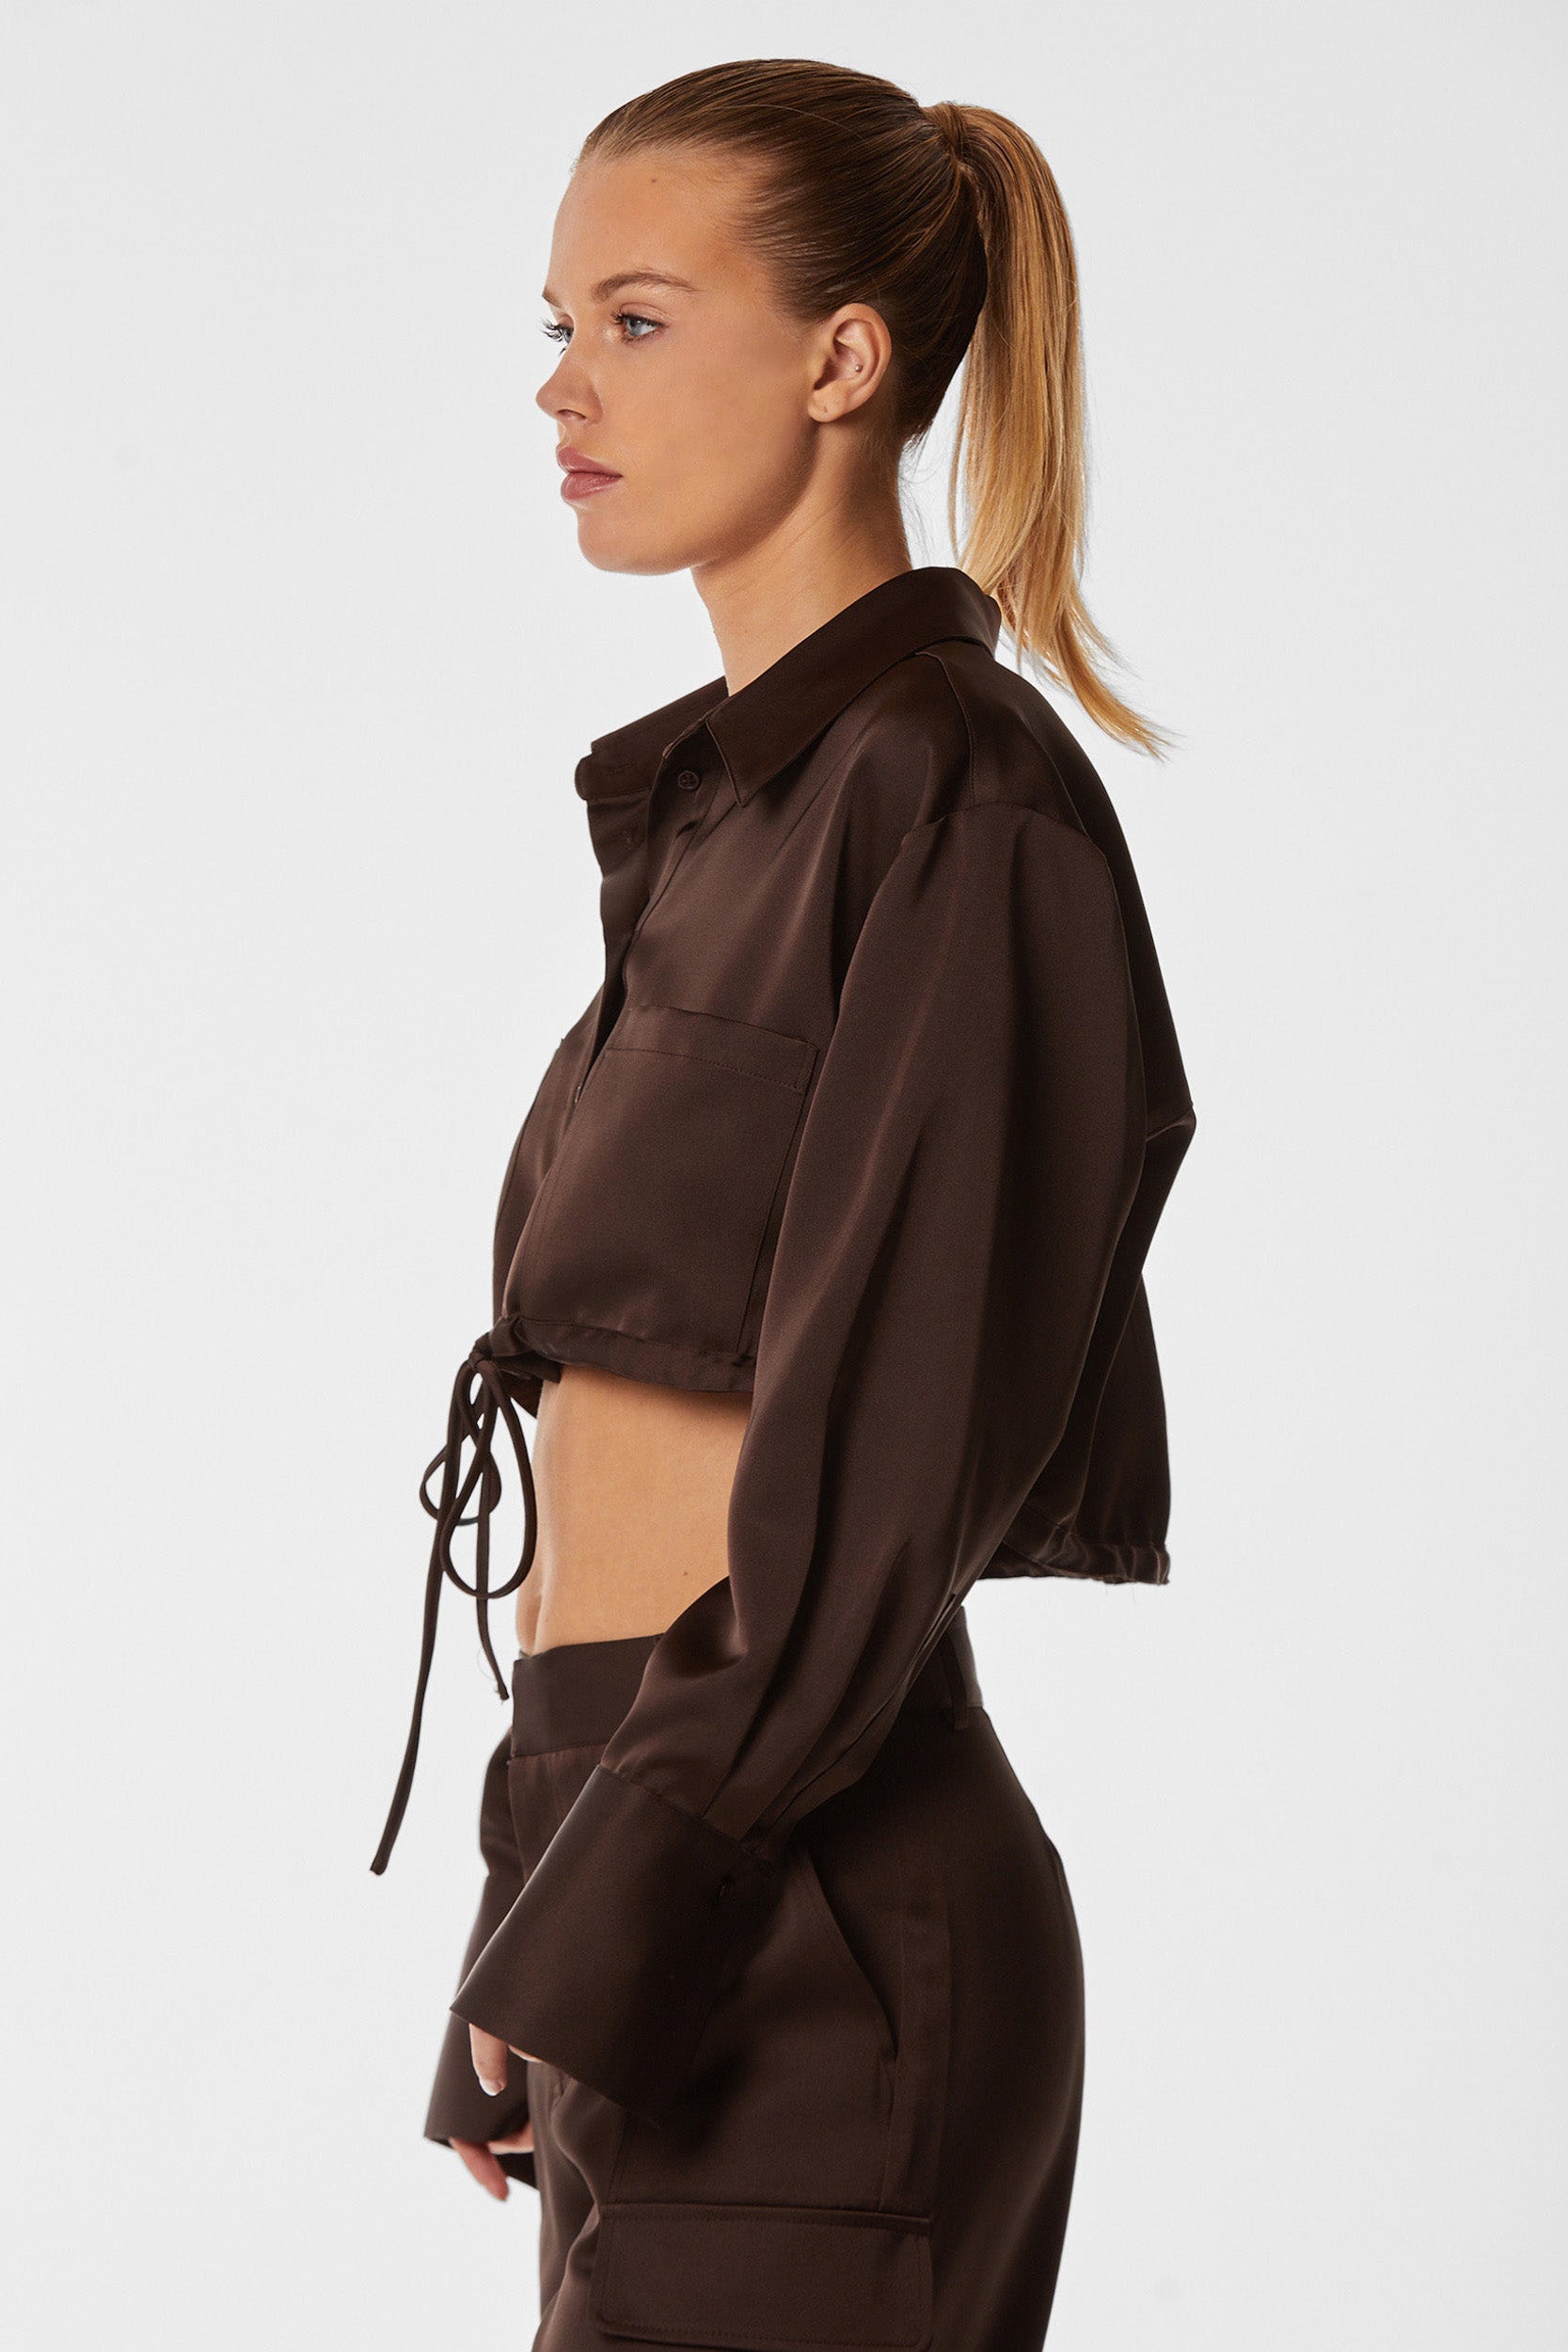 A woman with a ponytail is shown in profile wearing the Milan Satin Button Up - Espresso, a cropped, long-sleeve shirt with a tie-waist. She pairs it with matching high-waisted pants featuring cargo detailing and stands against a plain white background.